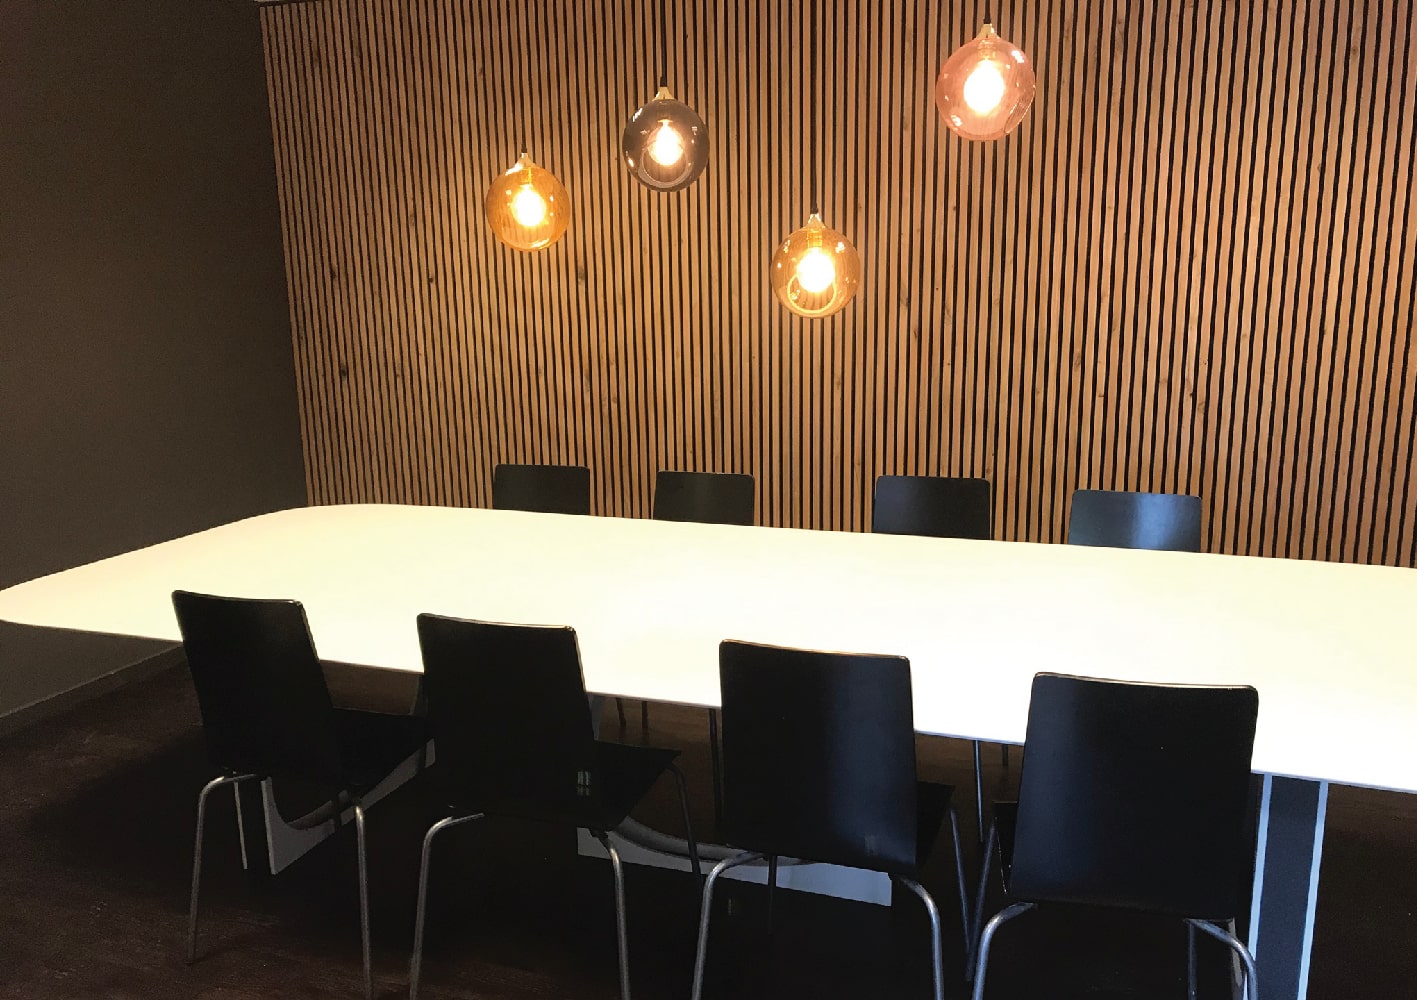 Conference room with wooden slat acoustic wall panels